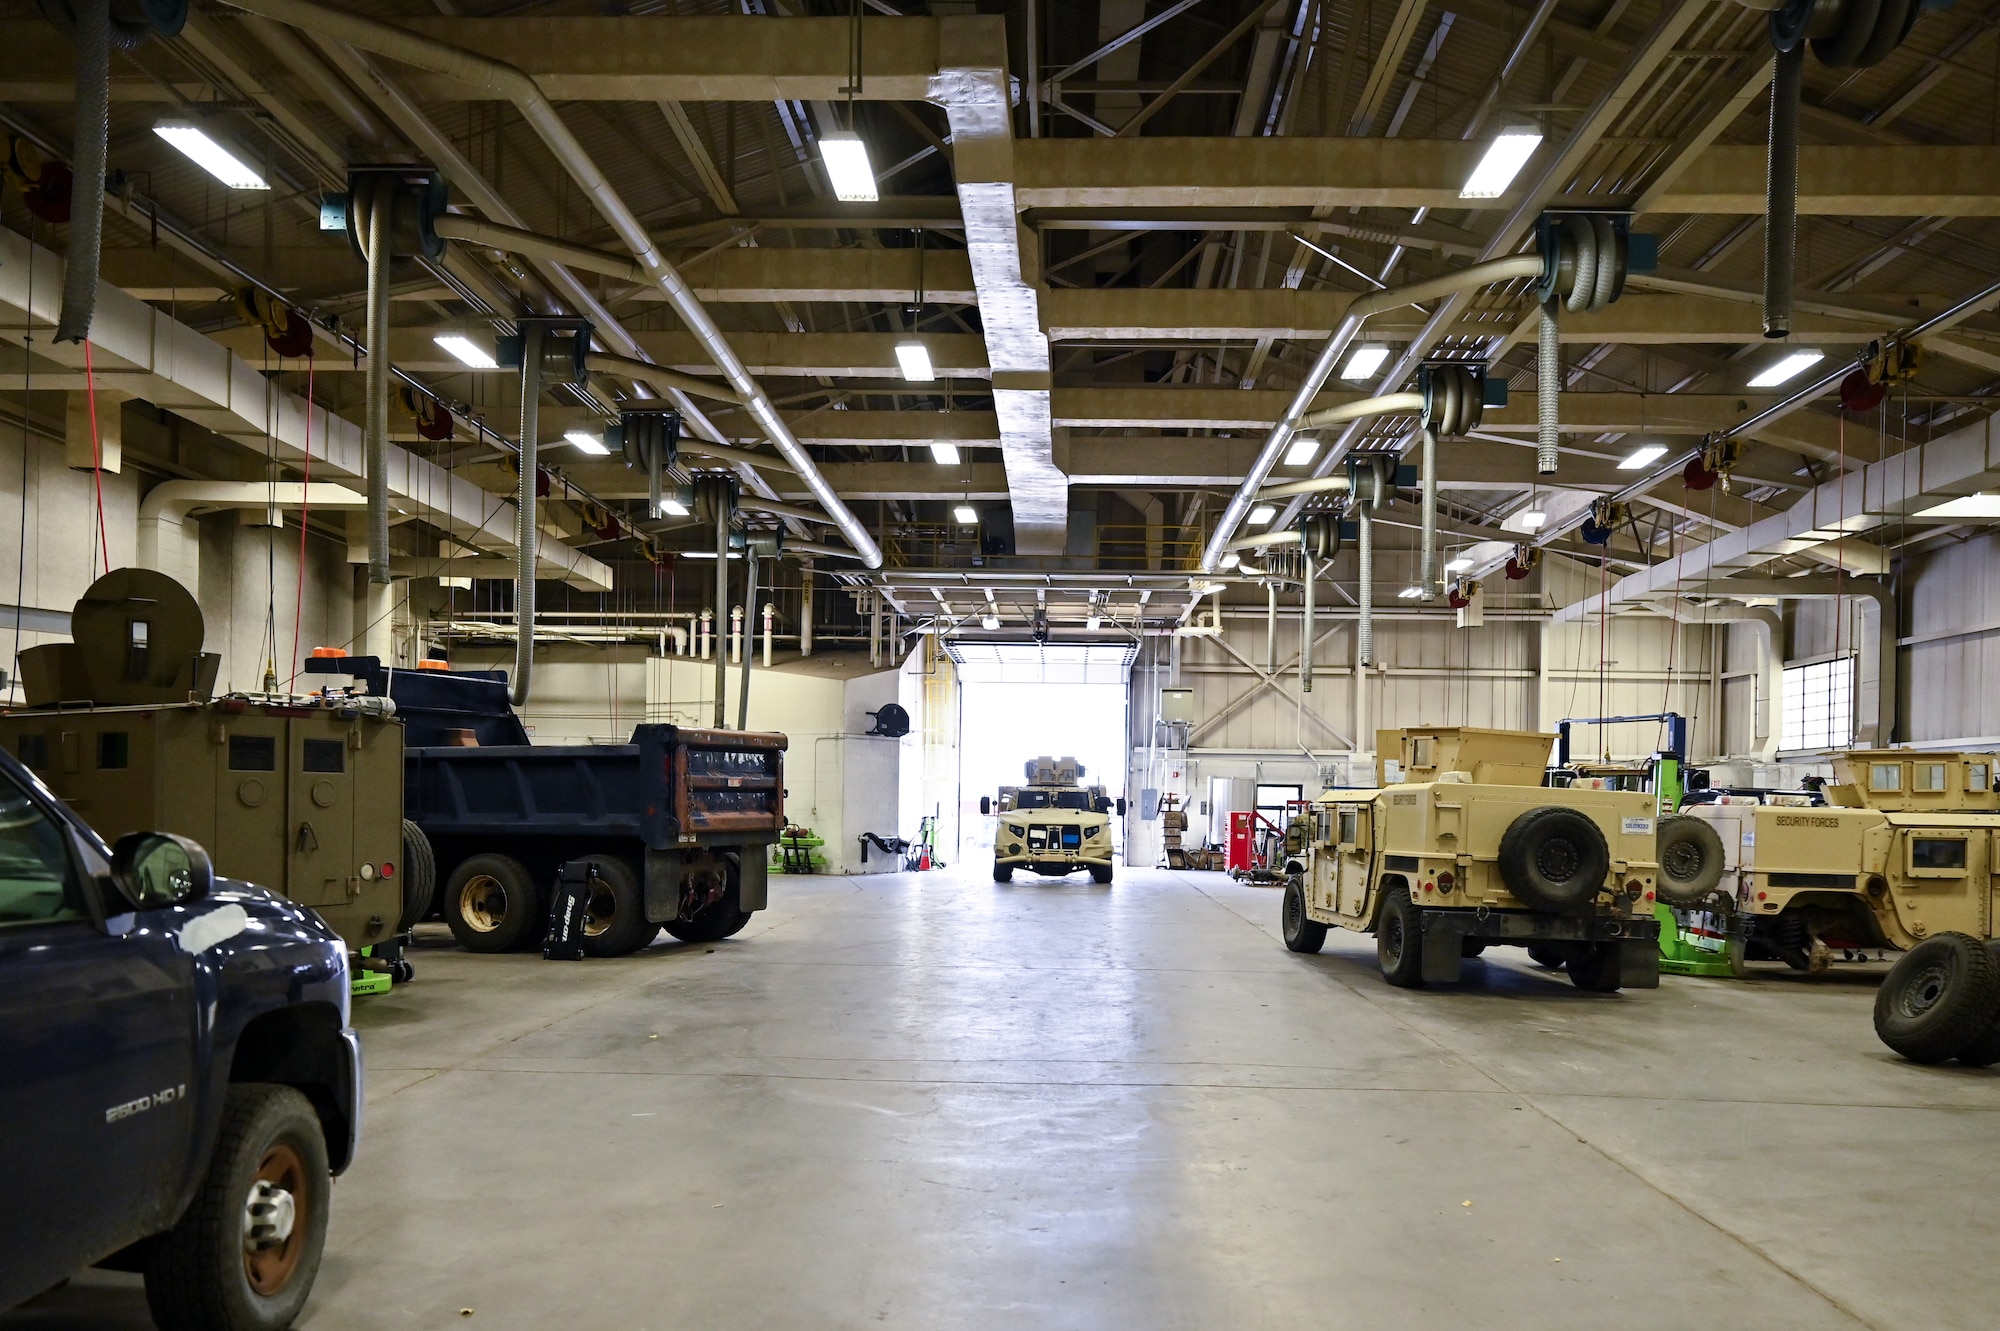 Mark Bramman, 90th Logistics Readiness Squadron vehicle maintenance craftsman, drives a Joint Light Tactical Vehicle into the maintenance bay before performing a limited technical inspection on F.E. Warren Air Force Base, Wyoming, Oct 25, 2022. The 90 LRS is tasked with preparing the next generation of security forces vehicles sent to protect the 90th Missile Wing’s ICBM system as part of Air Force Global Strike Command’s priority to modernize. (U.S. Air Force photo by Joseph Coslett)